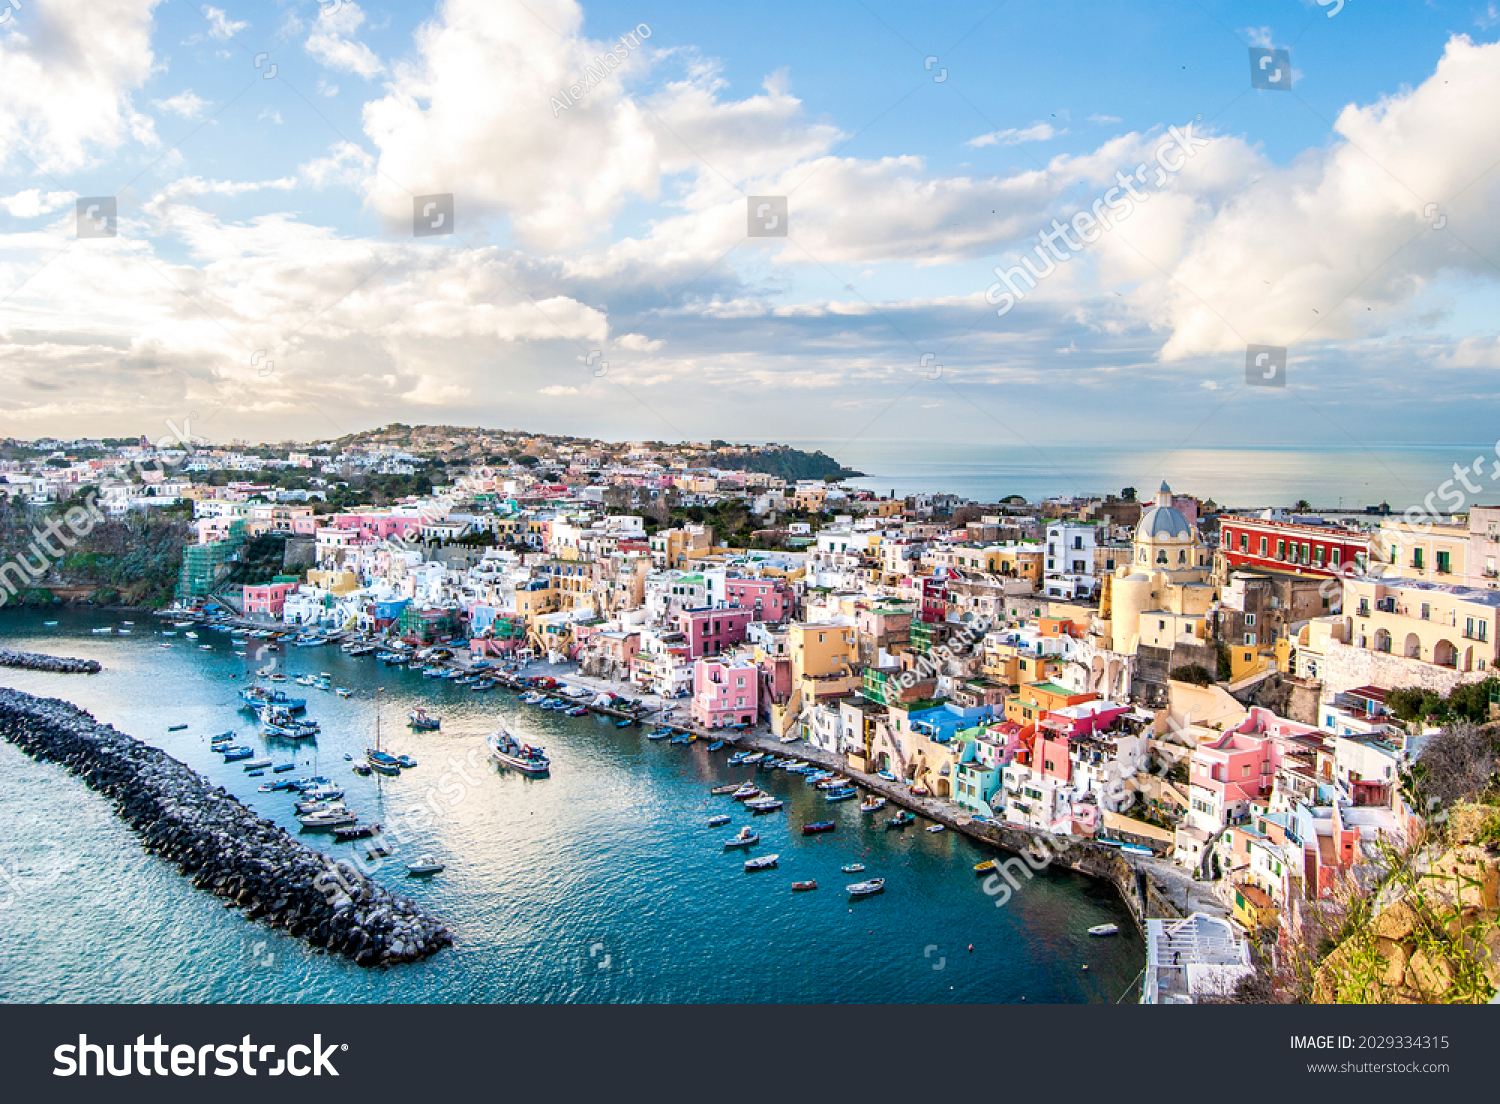 Panoramic view of Marina Corricella, a seaside fishing village in Procida island, with colorful buildings, harbor and boats, in Procida Island, province of Naples, Italy #2029334315